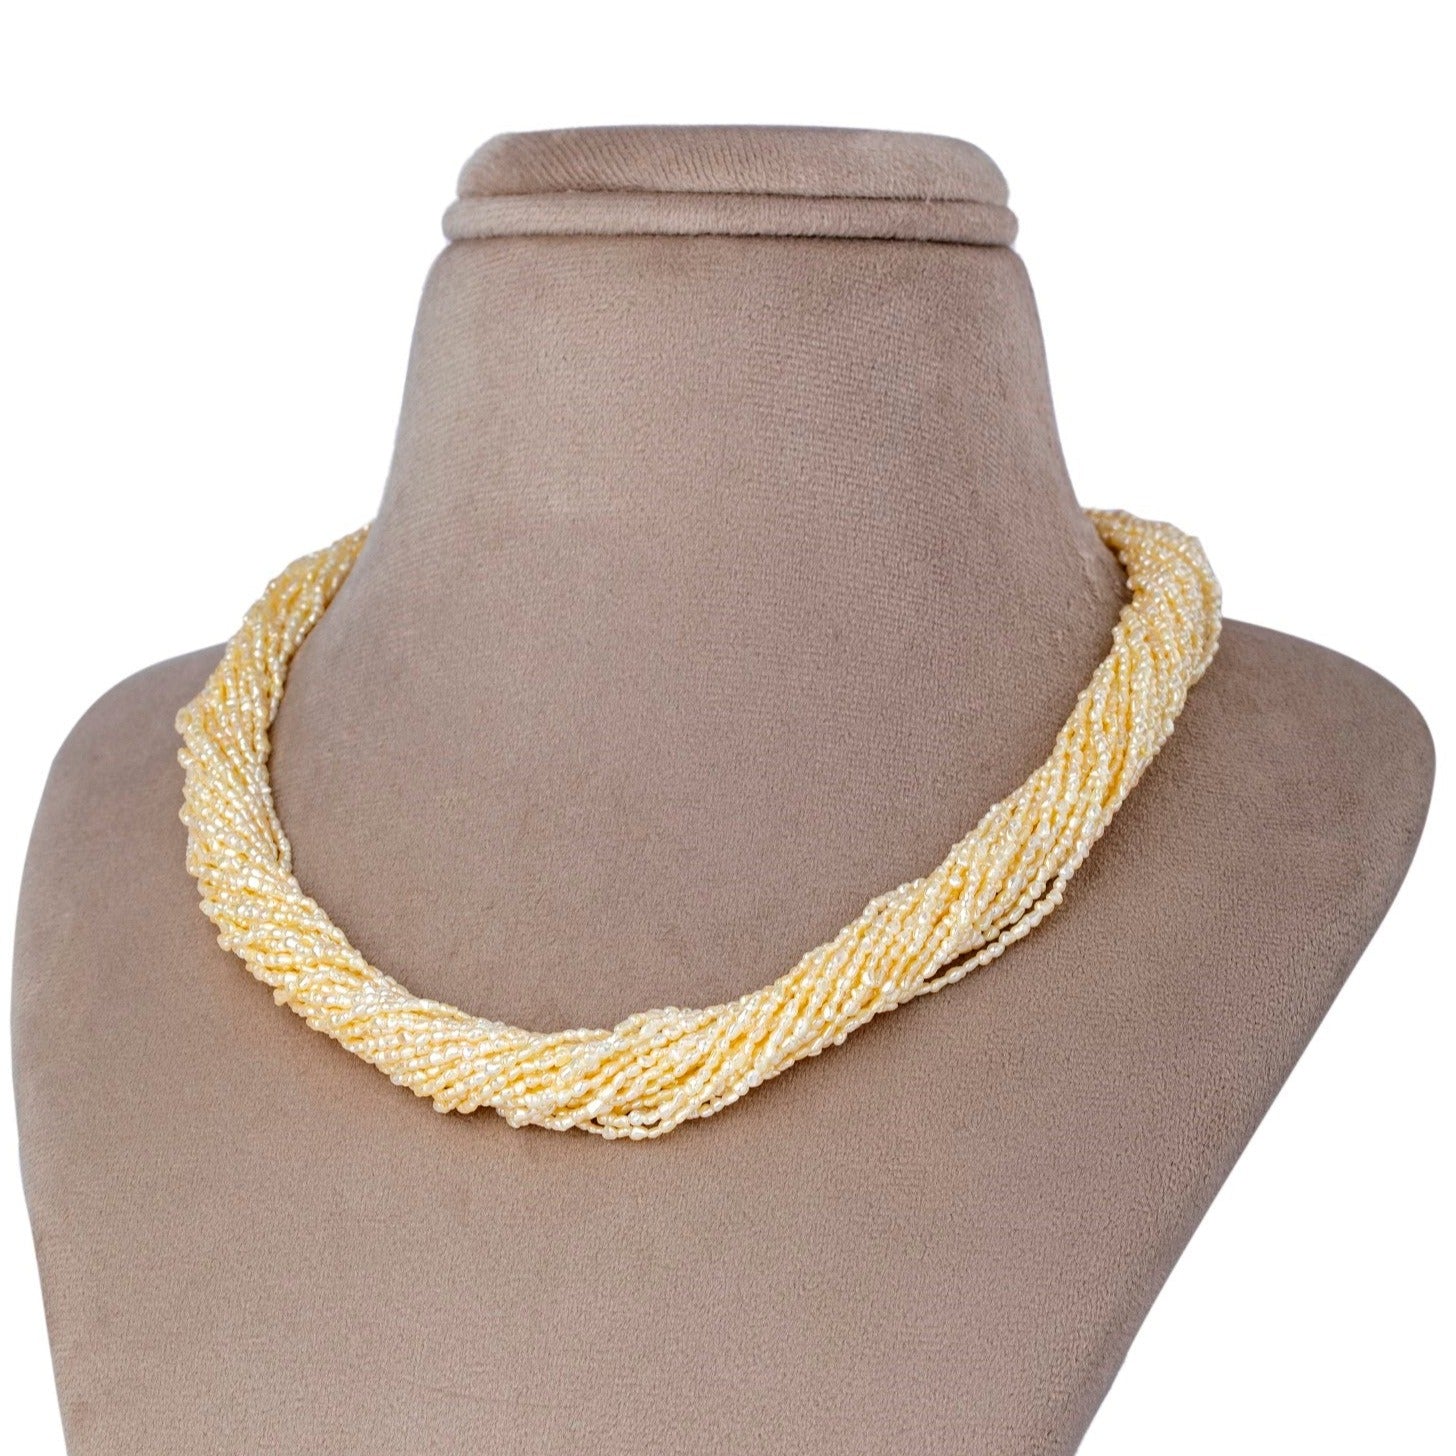 Serenity Twist: Golden Rice Keshi Pearl Necklace with Organic Appeal